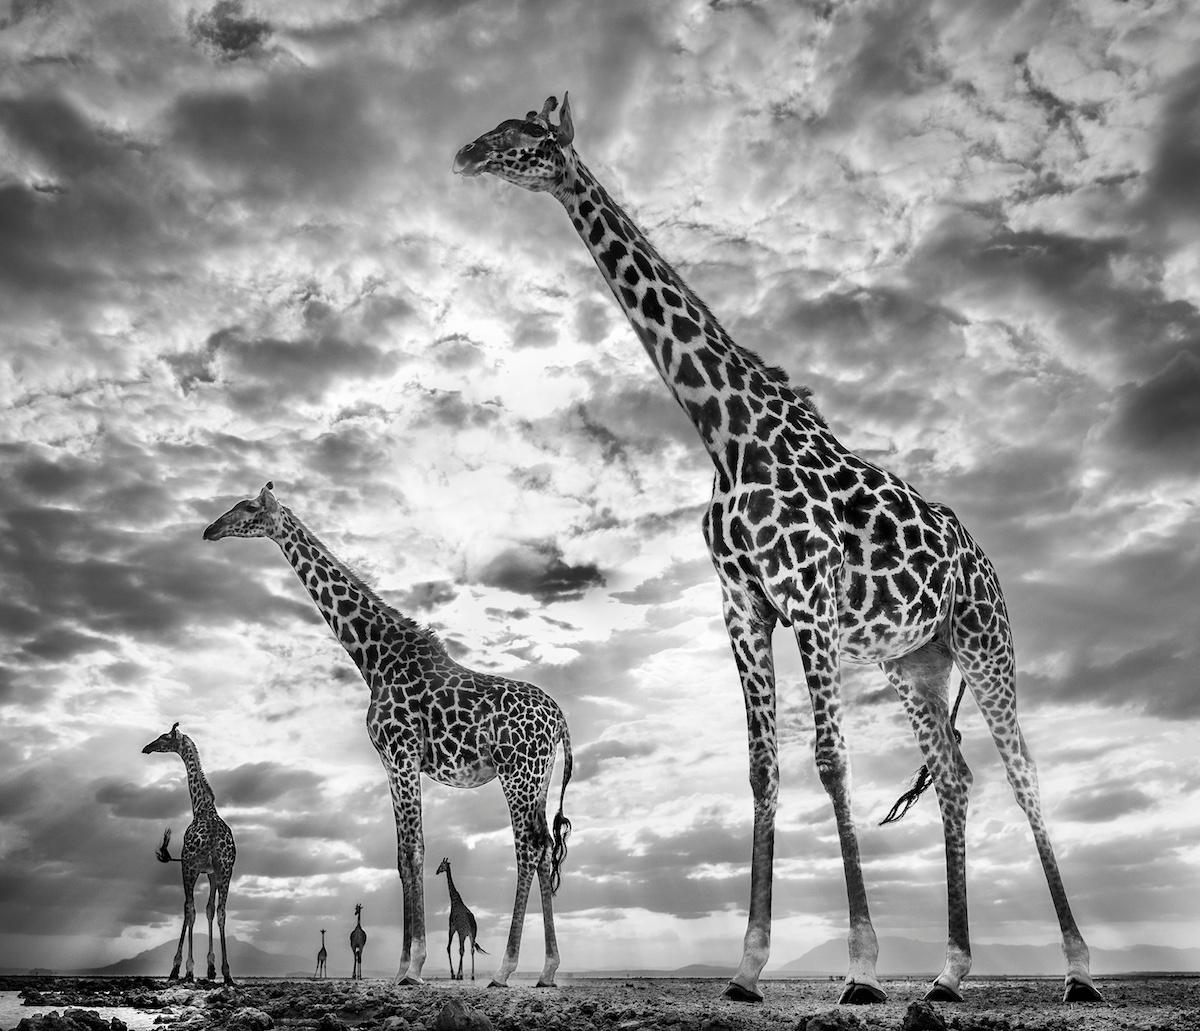 Keeping Up With The Crouch's, Black and White Animal Photography